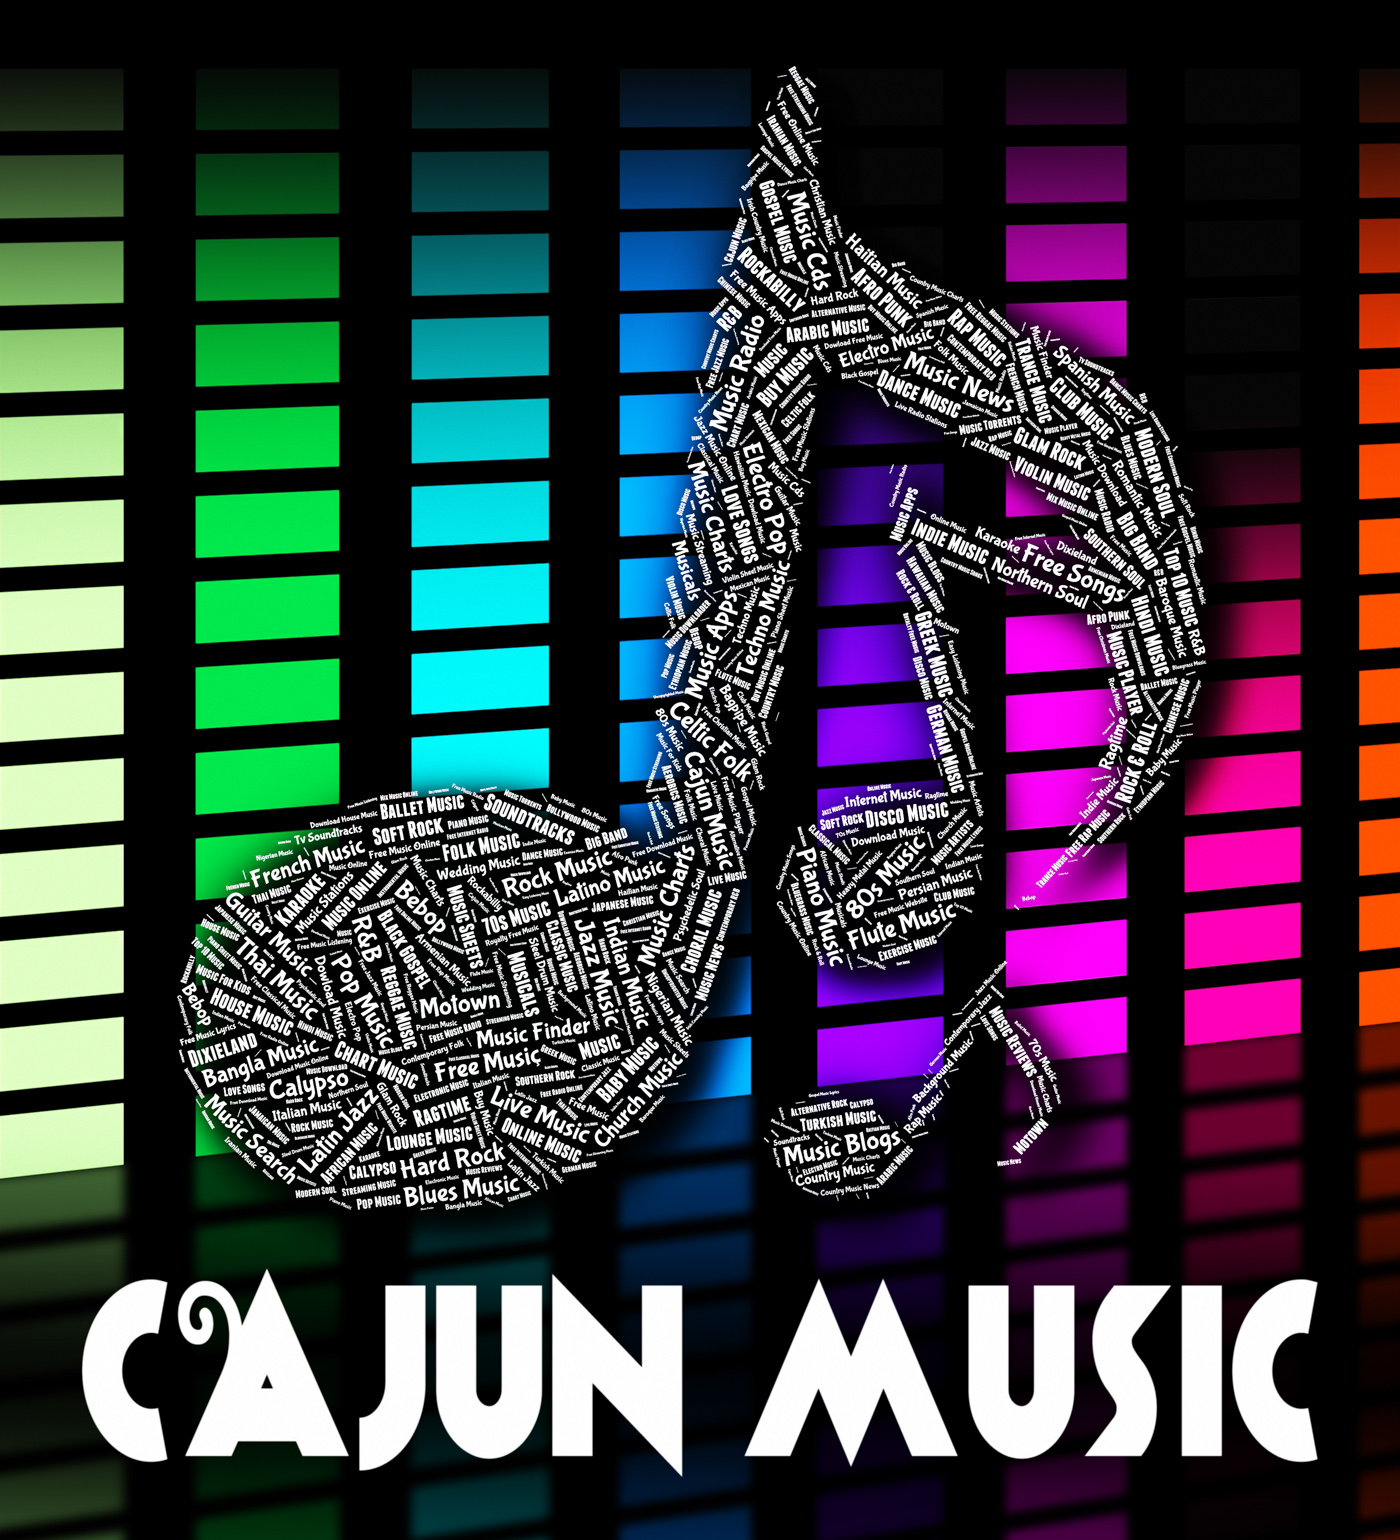 Cajun music shows sound tracks and acoustic photo